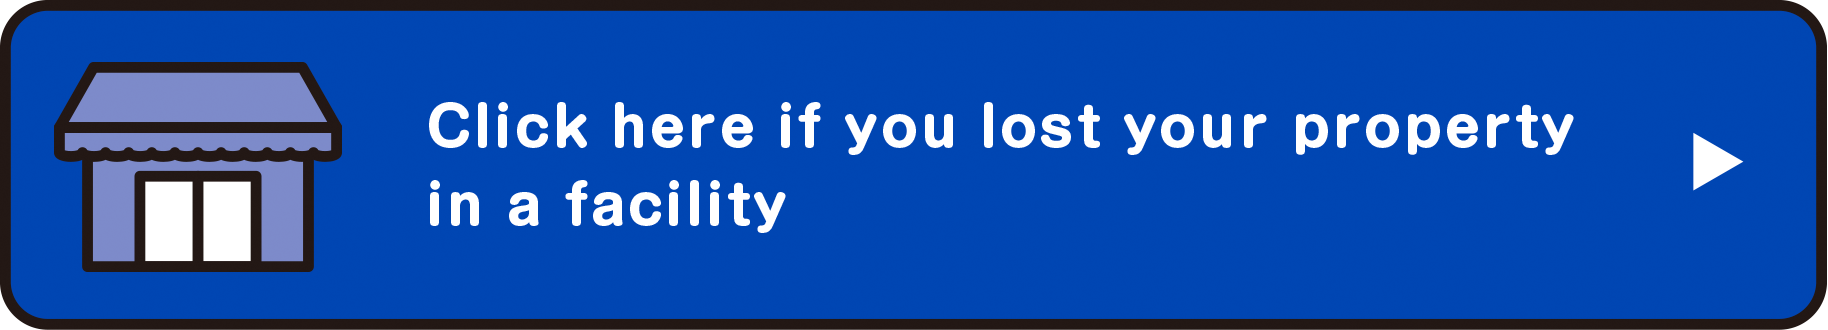 Click here if you lost your property in a facility.